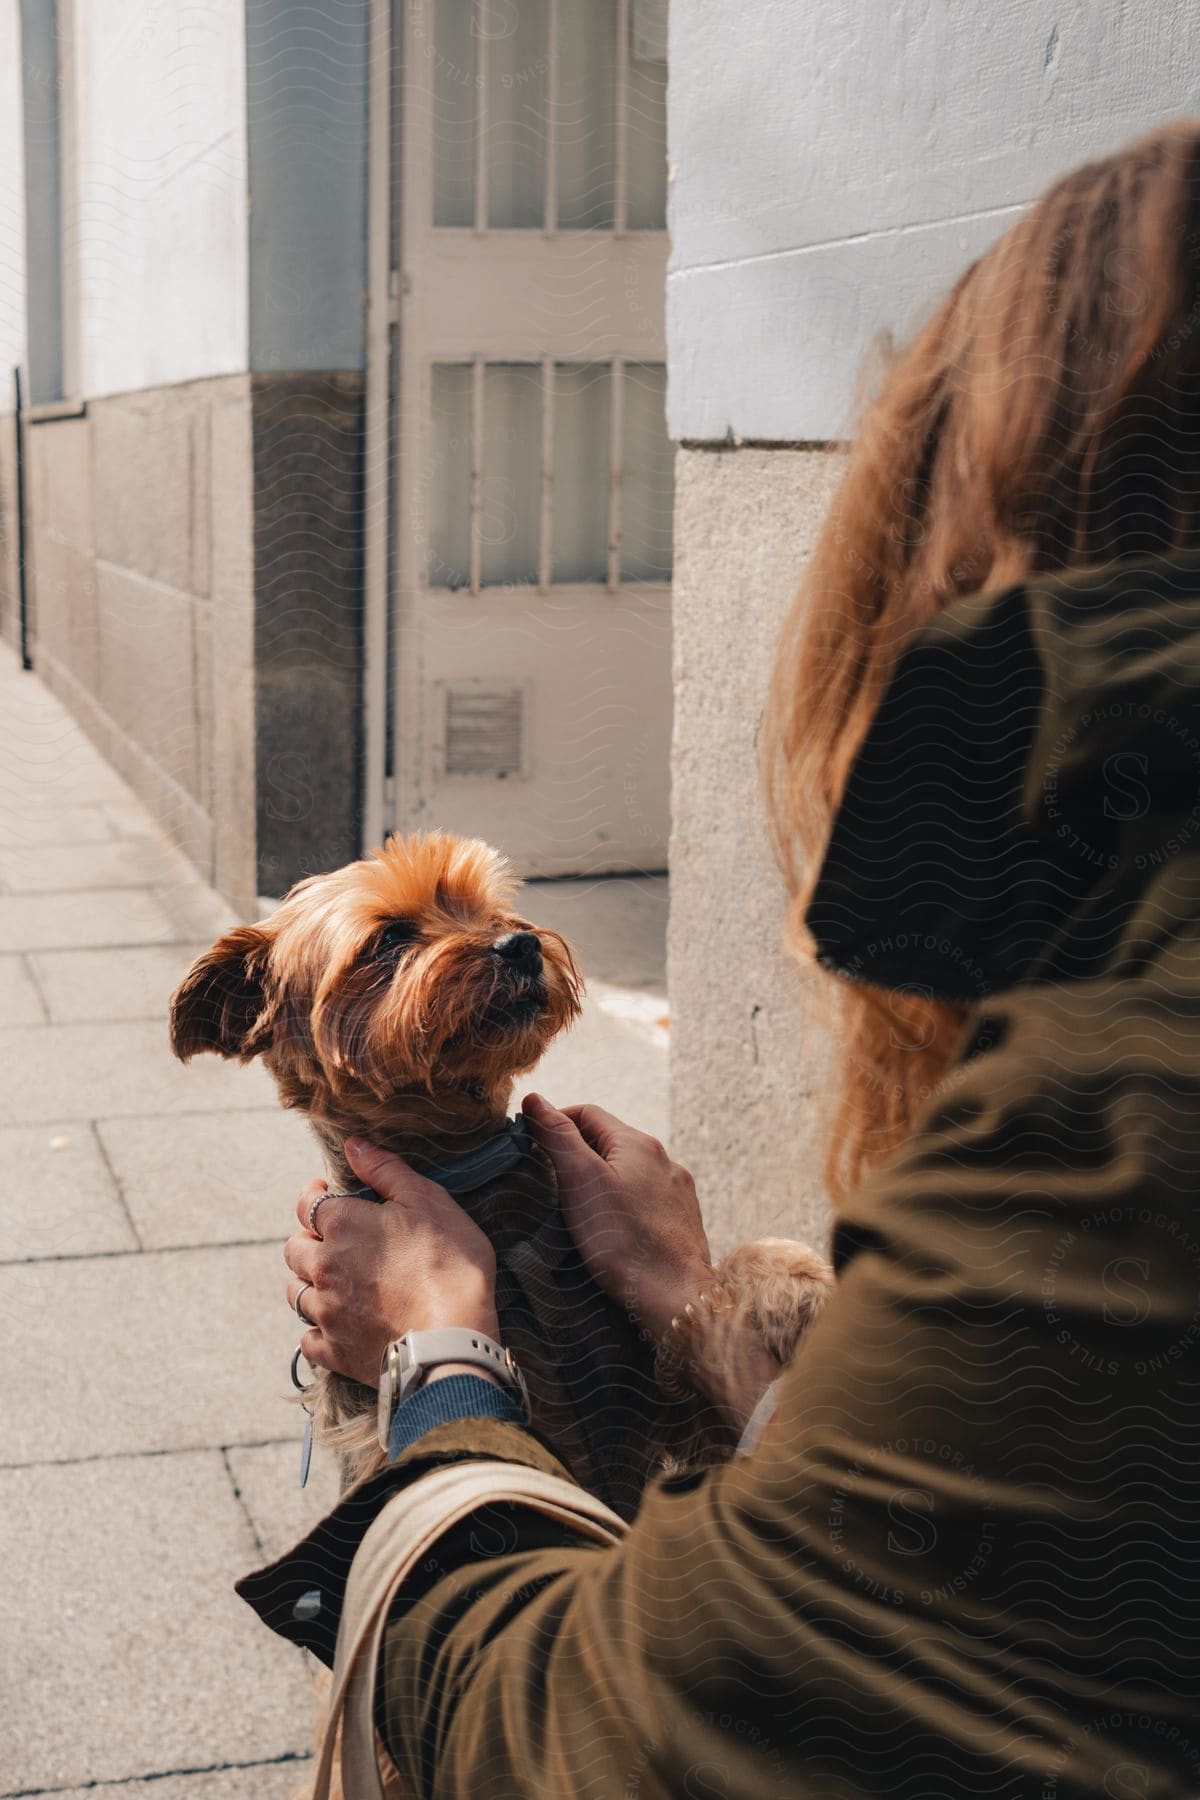 Woman with brown hair and a dark green coat pets a small brown dog near a building